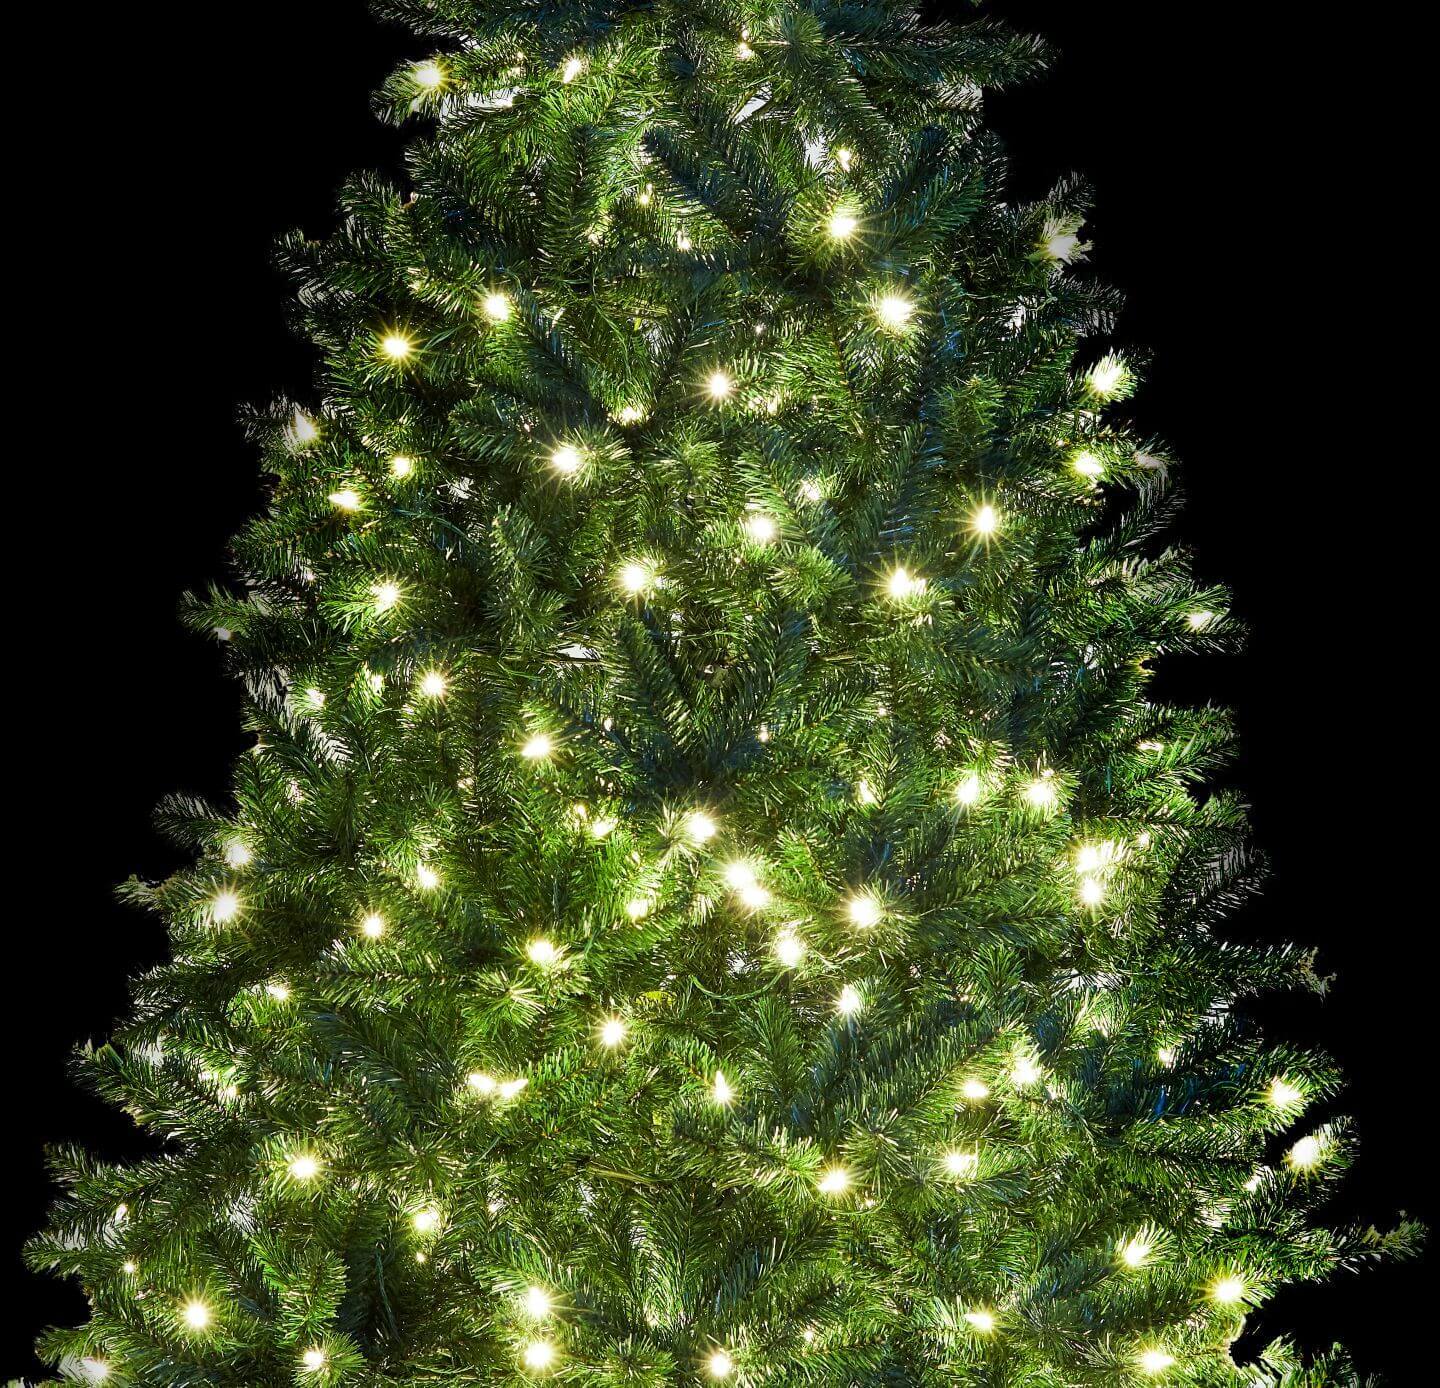 King of Christmas 9' Hancock Spruce Artificial Christmas Tree with 640 Warm White LED Lights. Final Sale.